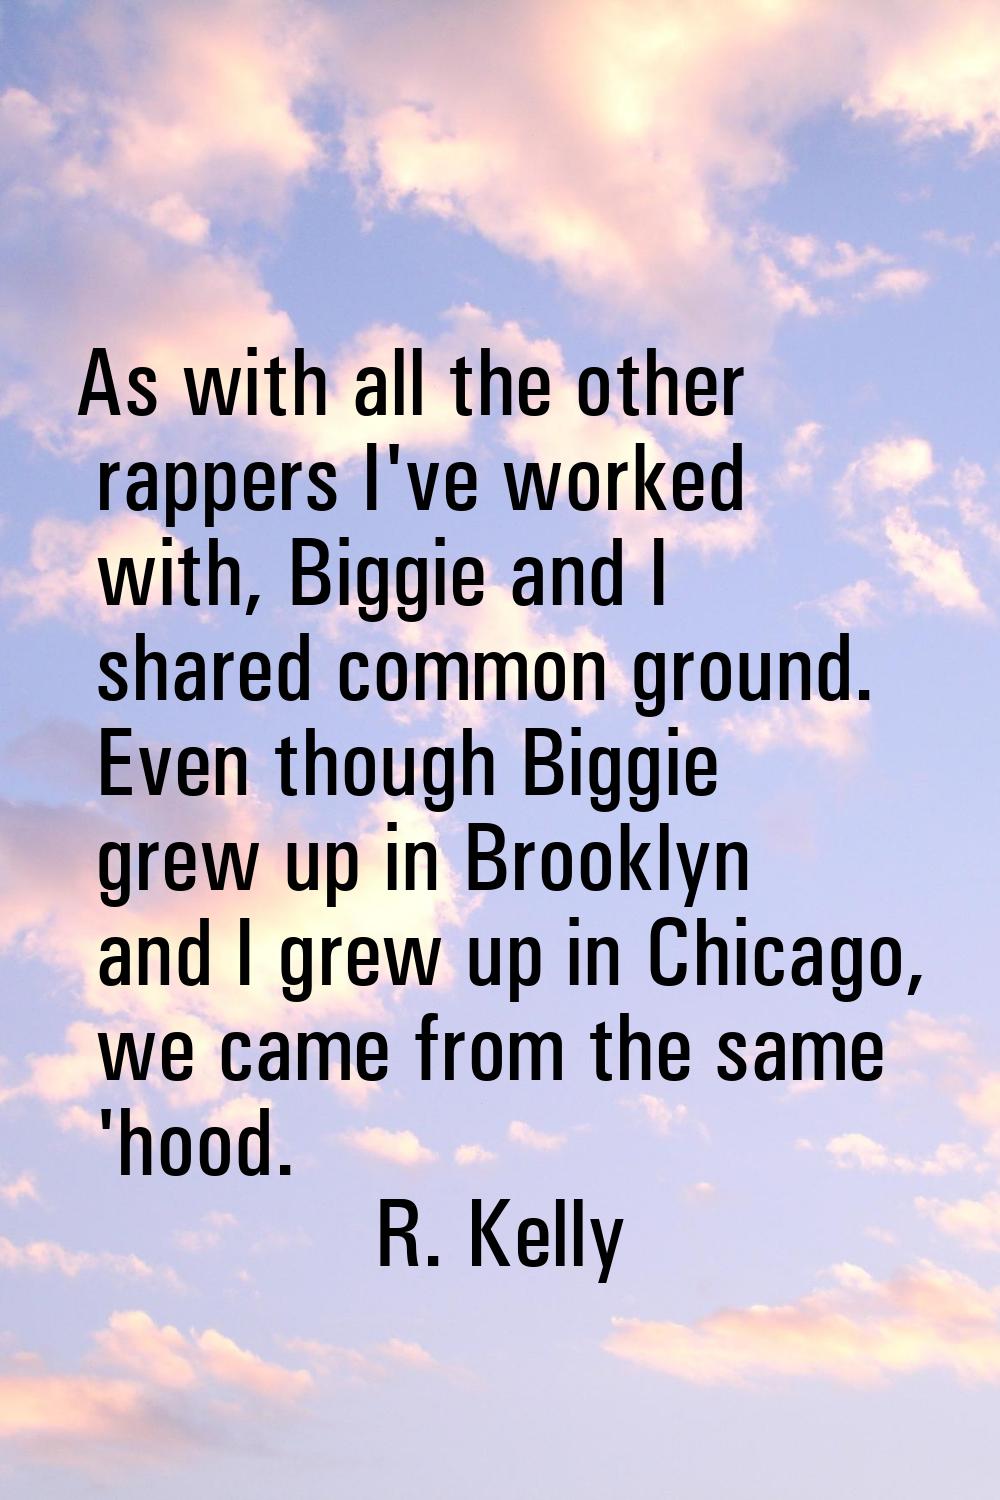 As with all the other rappers I've worked with, Biggie and I shared common ground. Even though Bigg